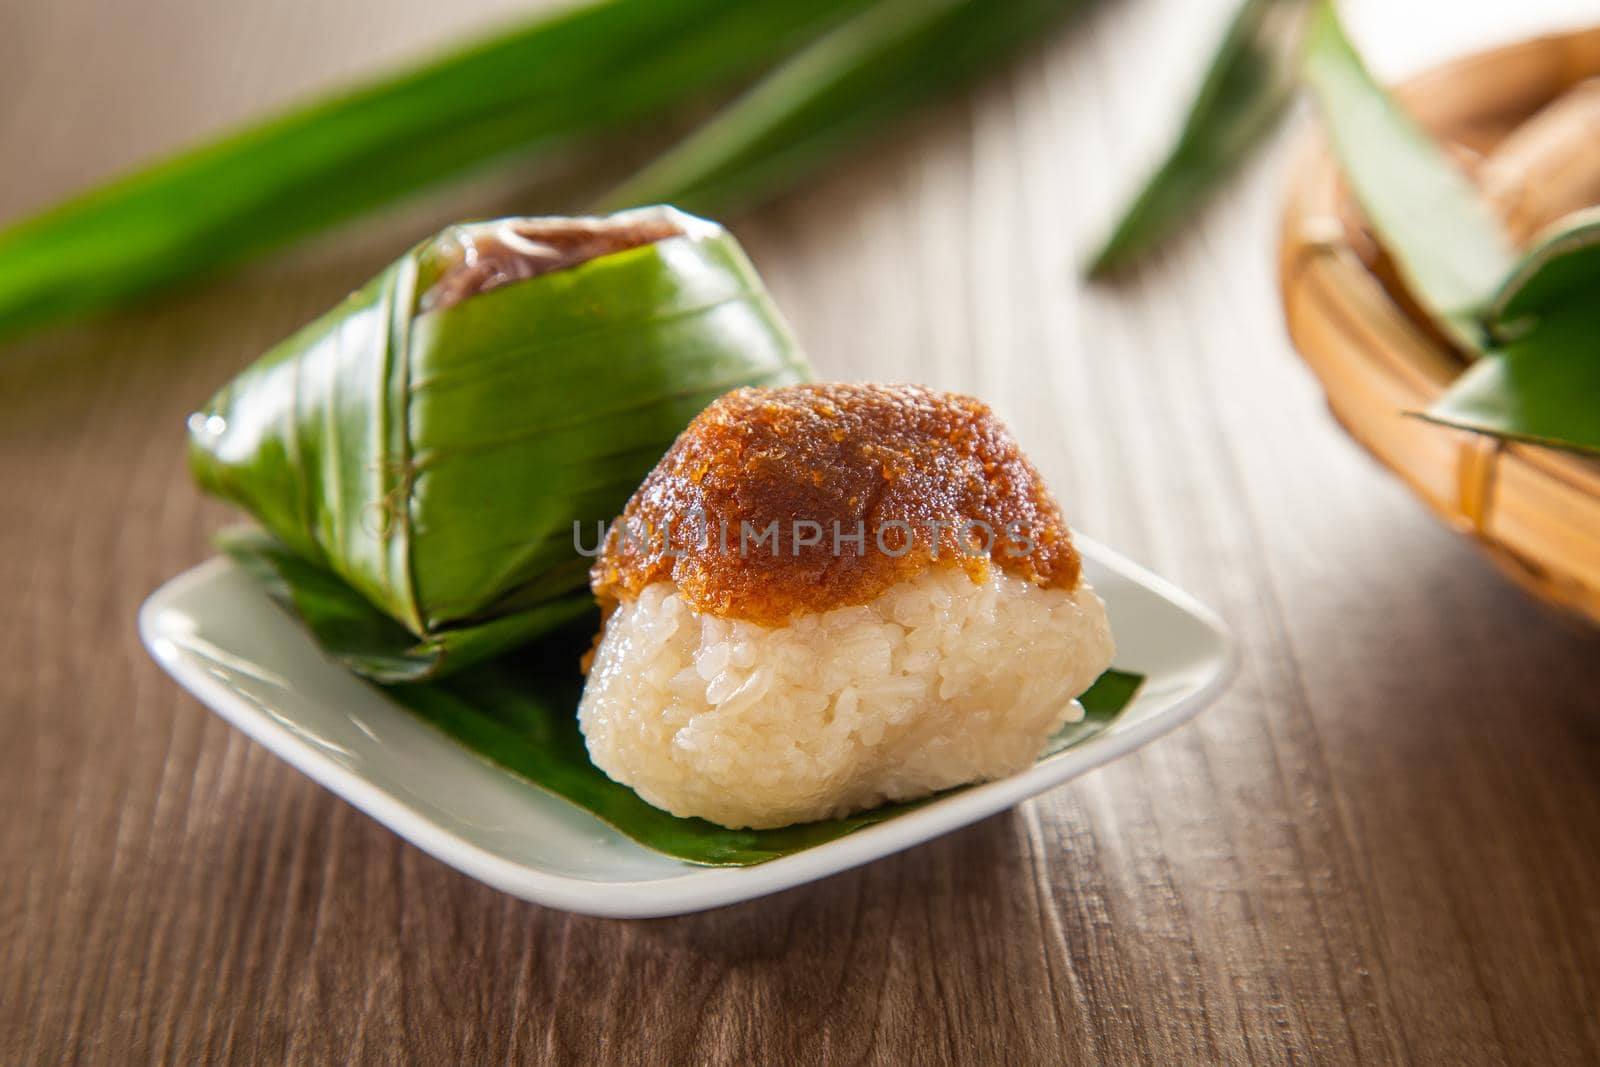 Kuih Pulut inti, traditional Malaysian Nyonya sweet dessert. It is made of steamed glutinous rice with coconut milk.